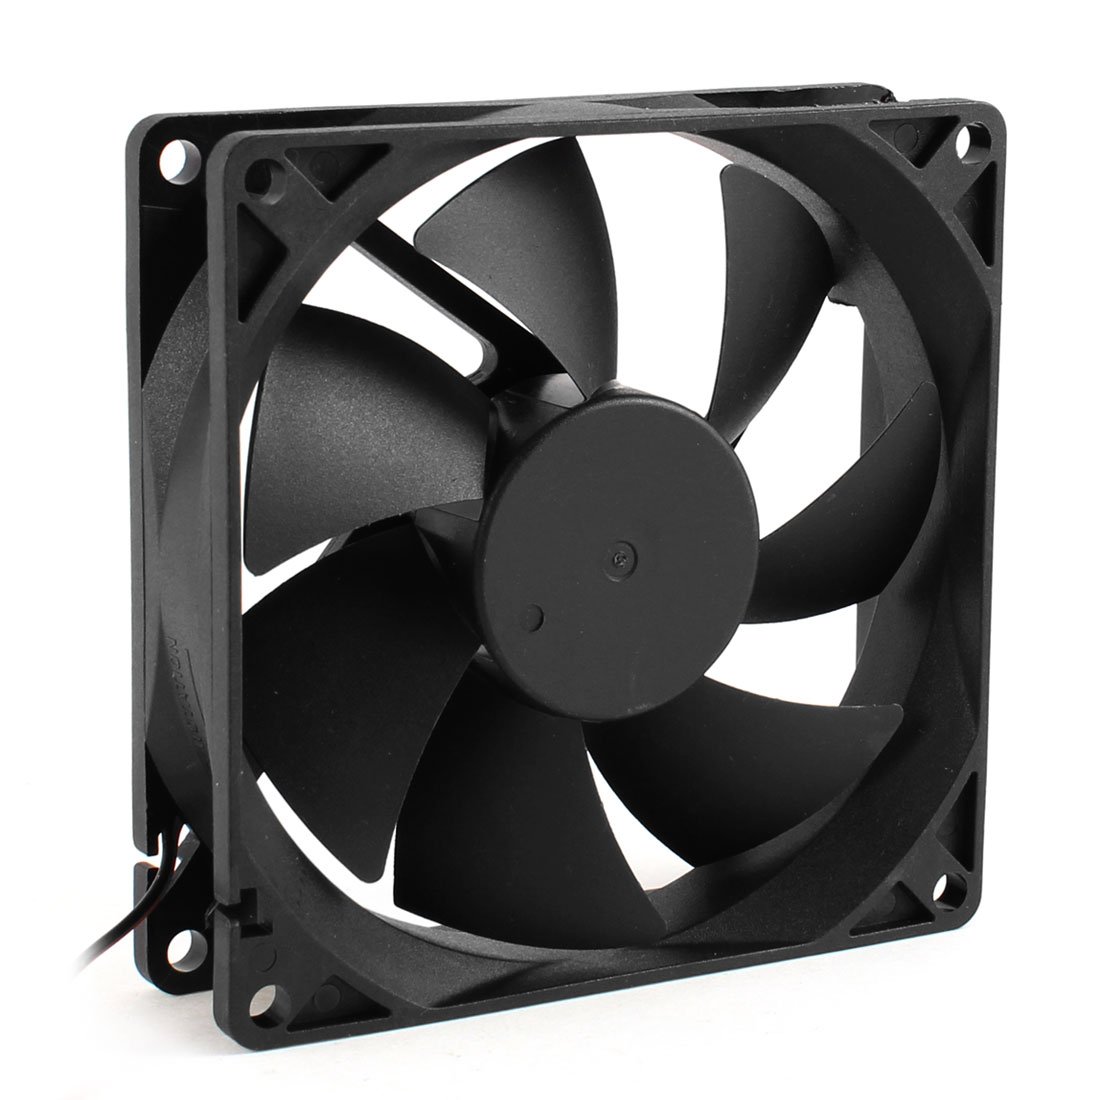 YOC Hot 92mm x 25mm 24V 2Pin Sleeve Bearing Cooling Fan for PC Case CPU Cooler